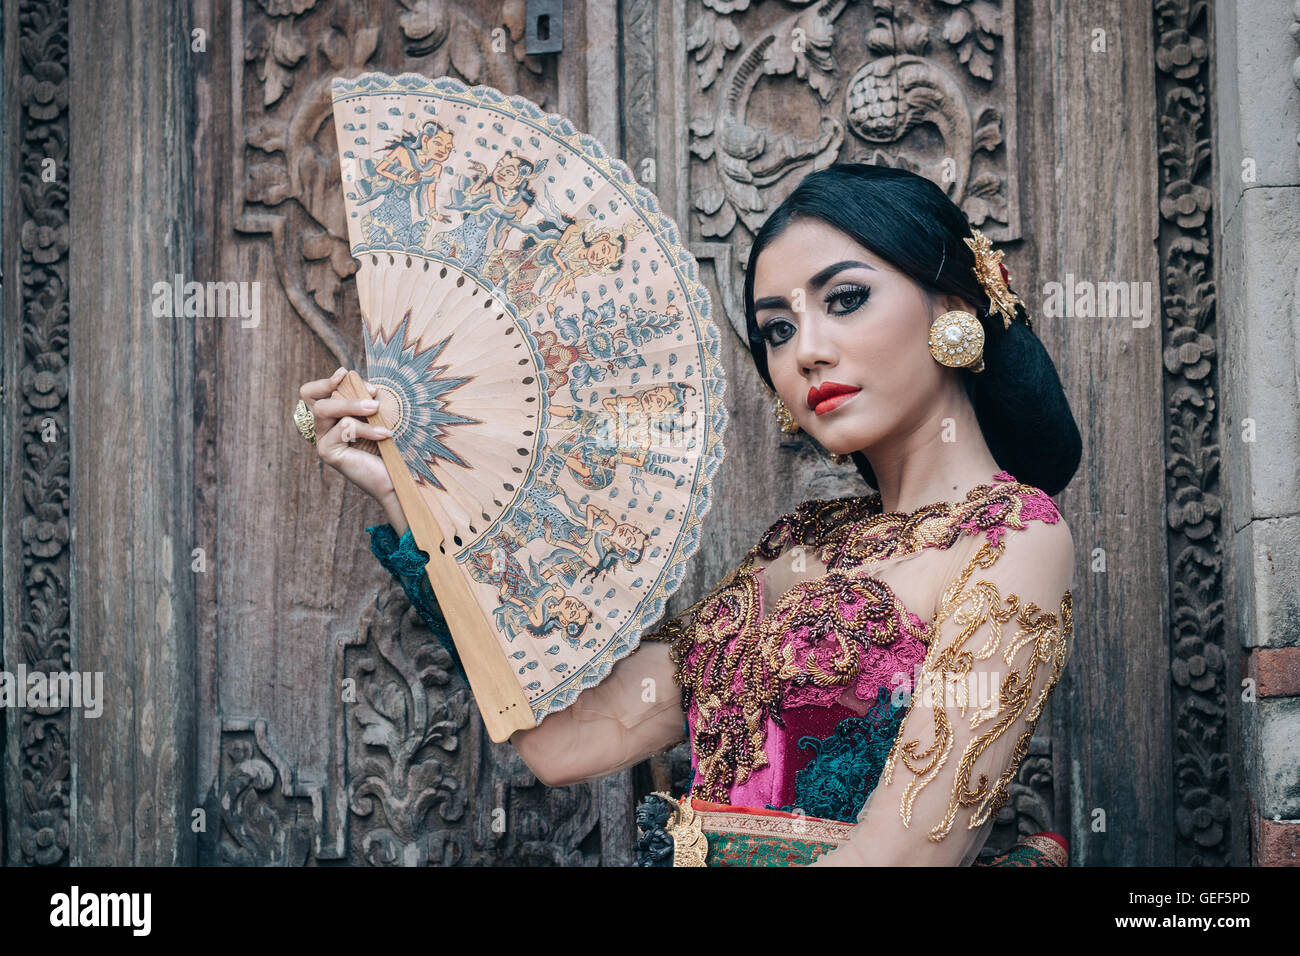 Balinese Woman in pose Stock Photo